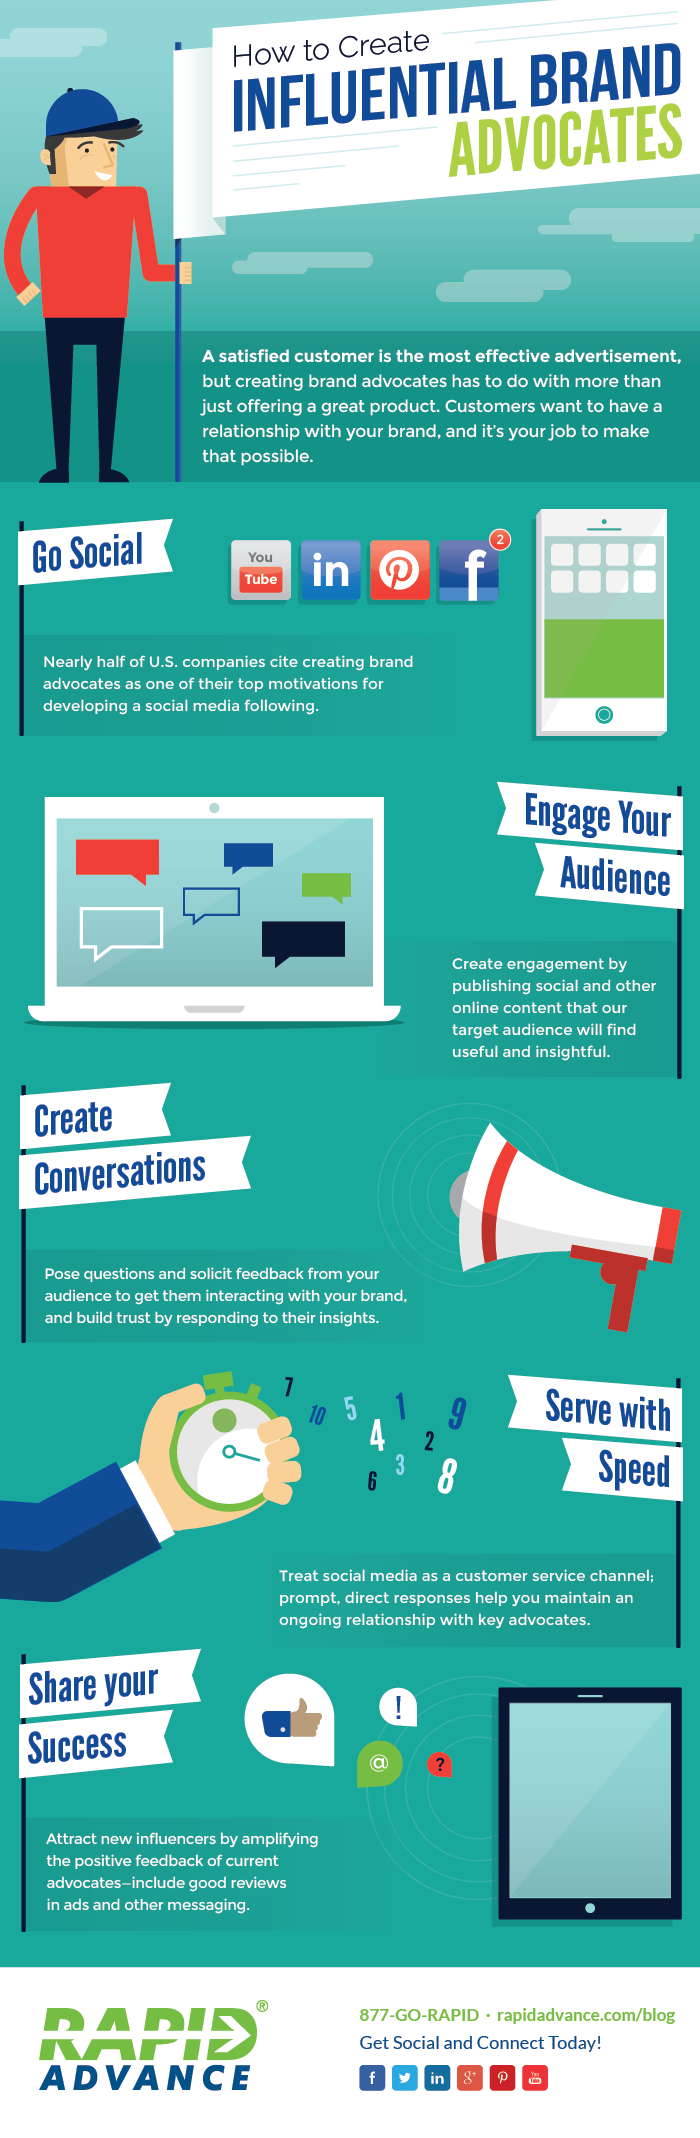 5 tips for creating Influential Brand Advocates for your business - #infographic